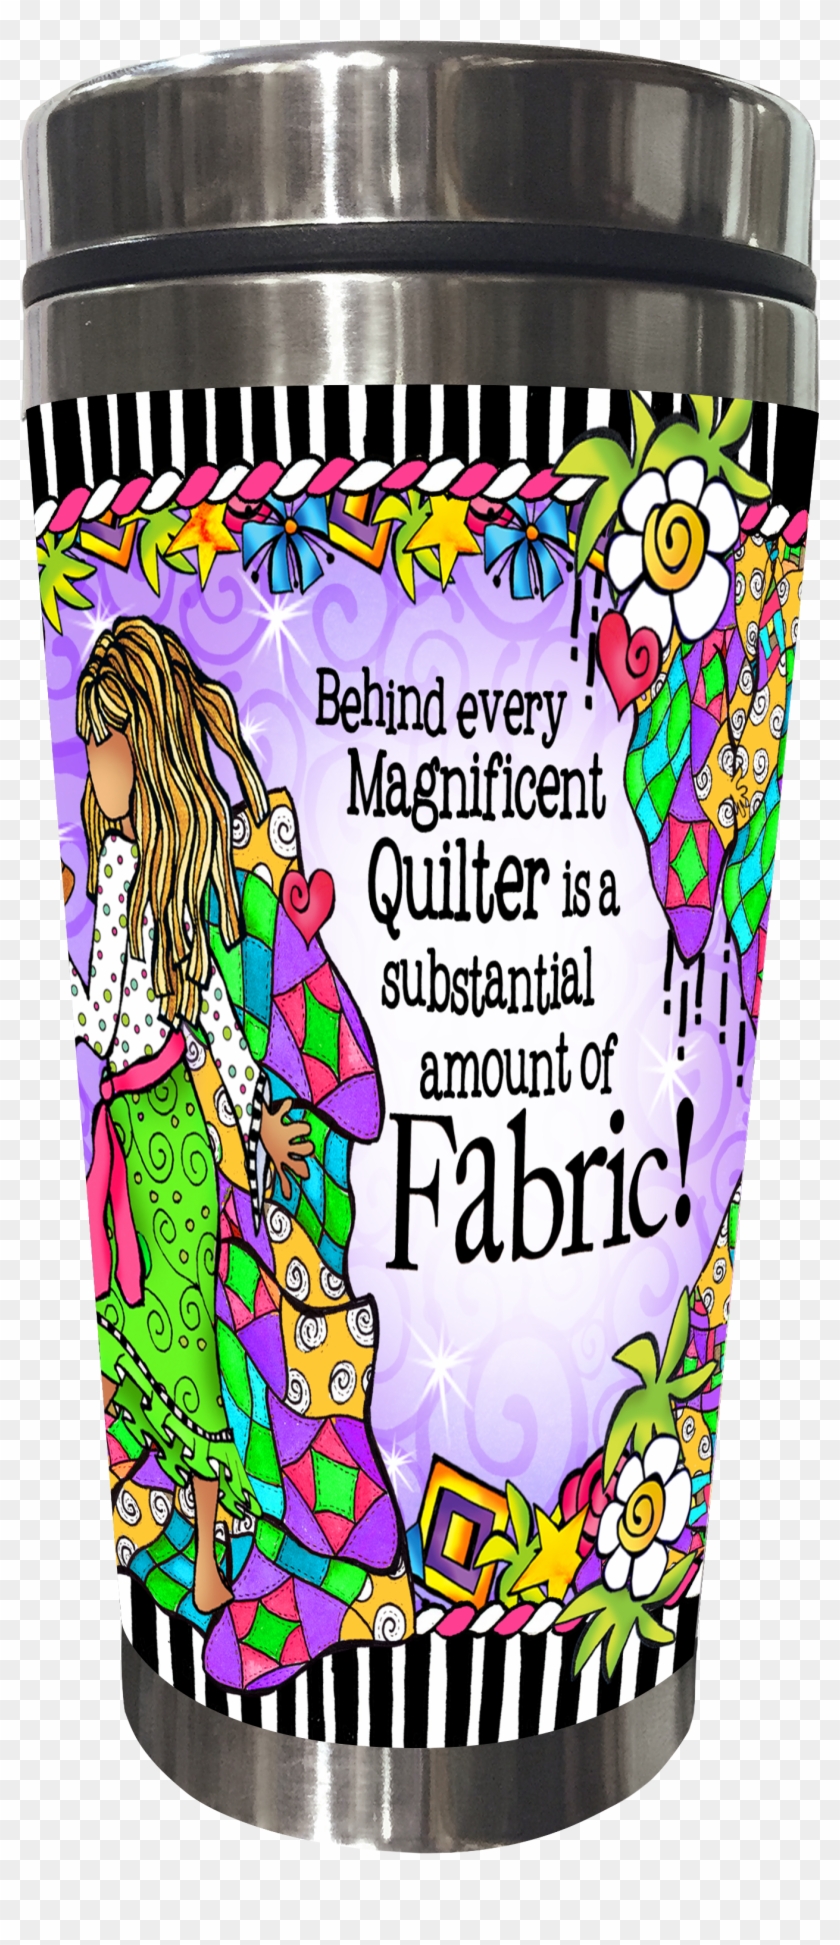 Behind Every Magnificent Quilter Is A Substantial Amount - Behind Every Magnificent Quilter Is A Substantial Amount #1623267